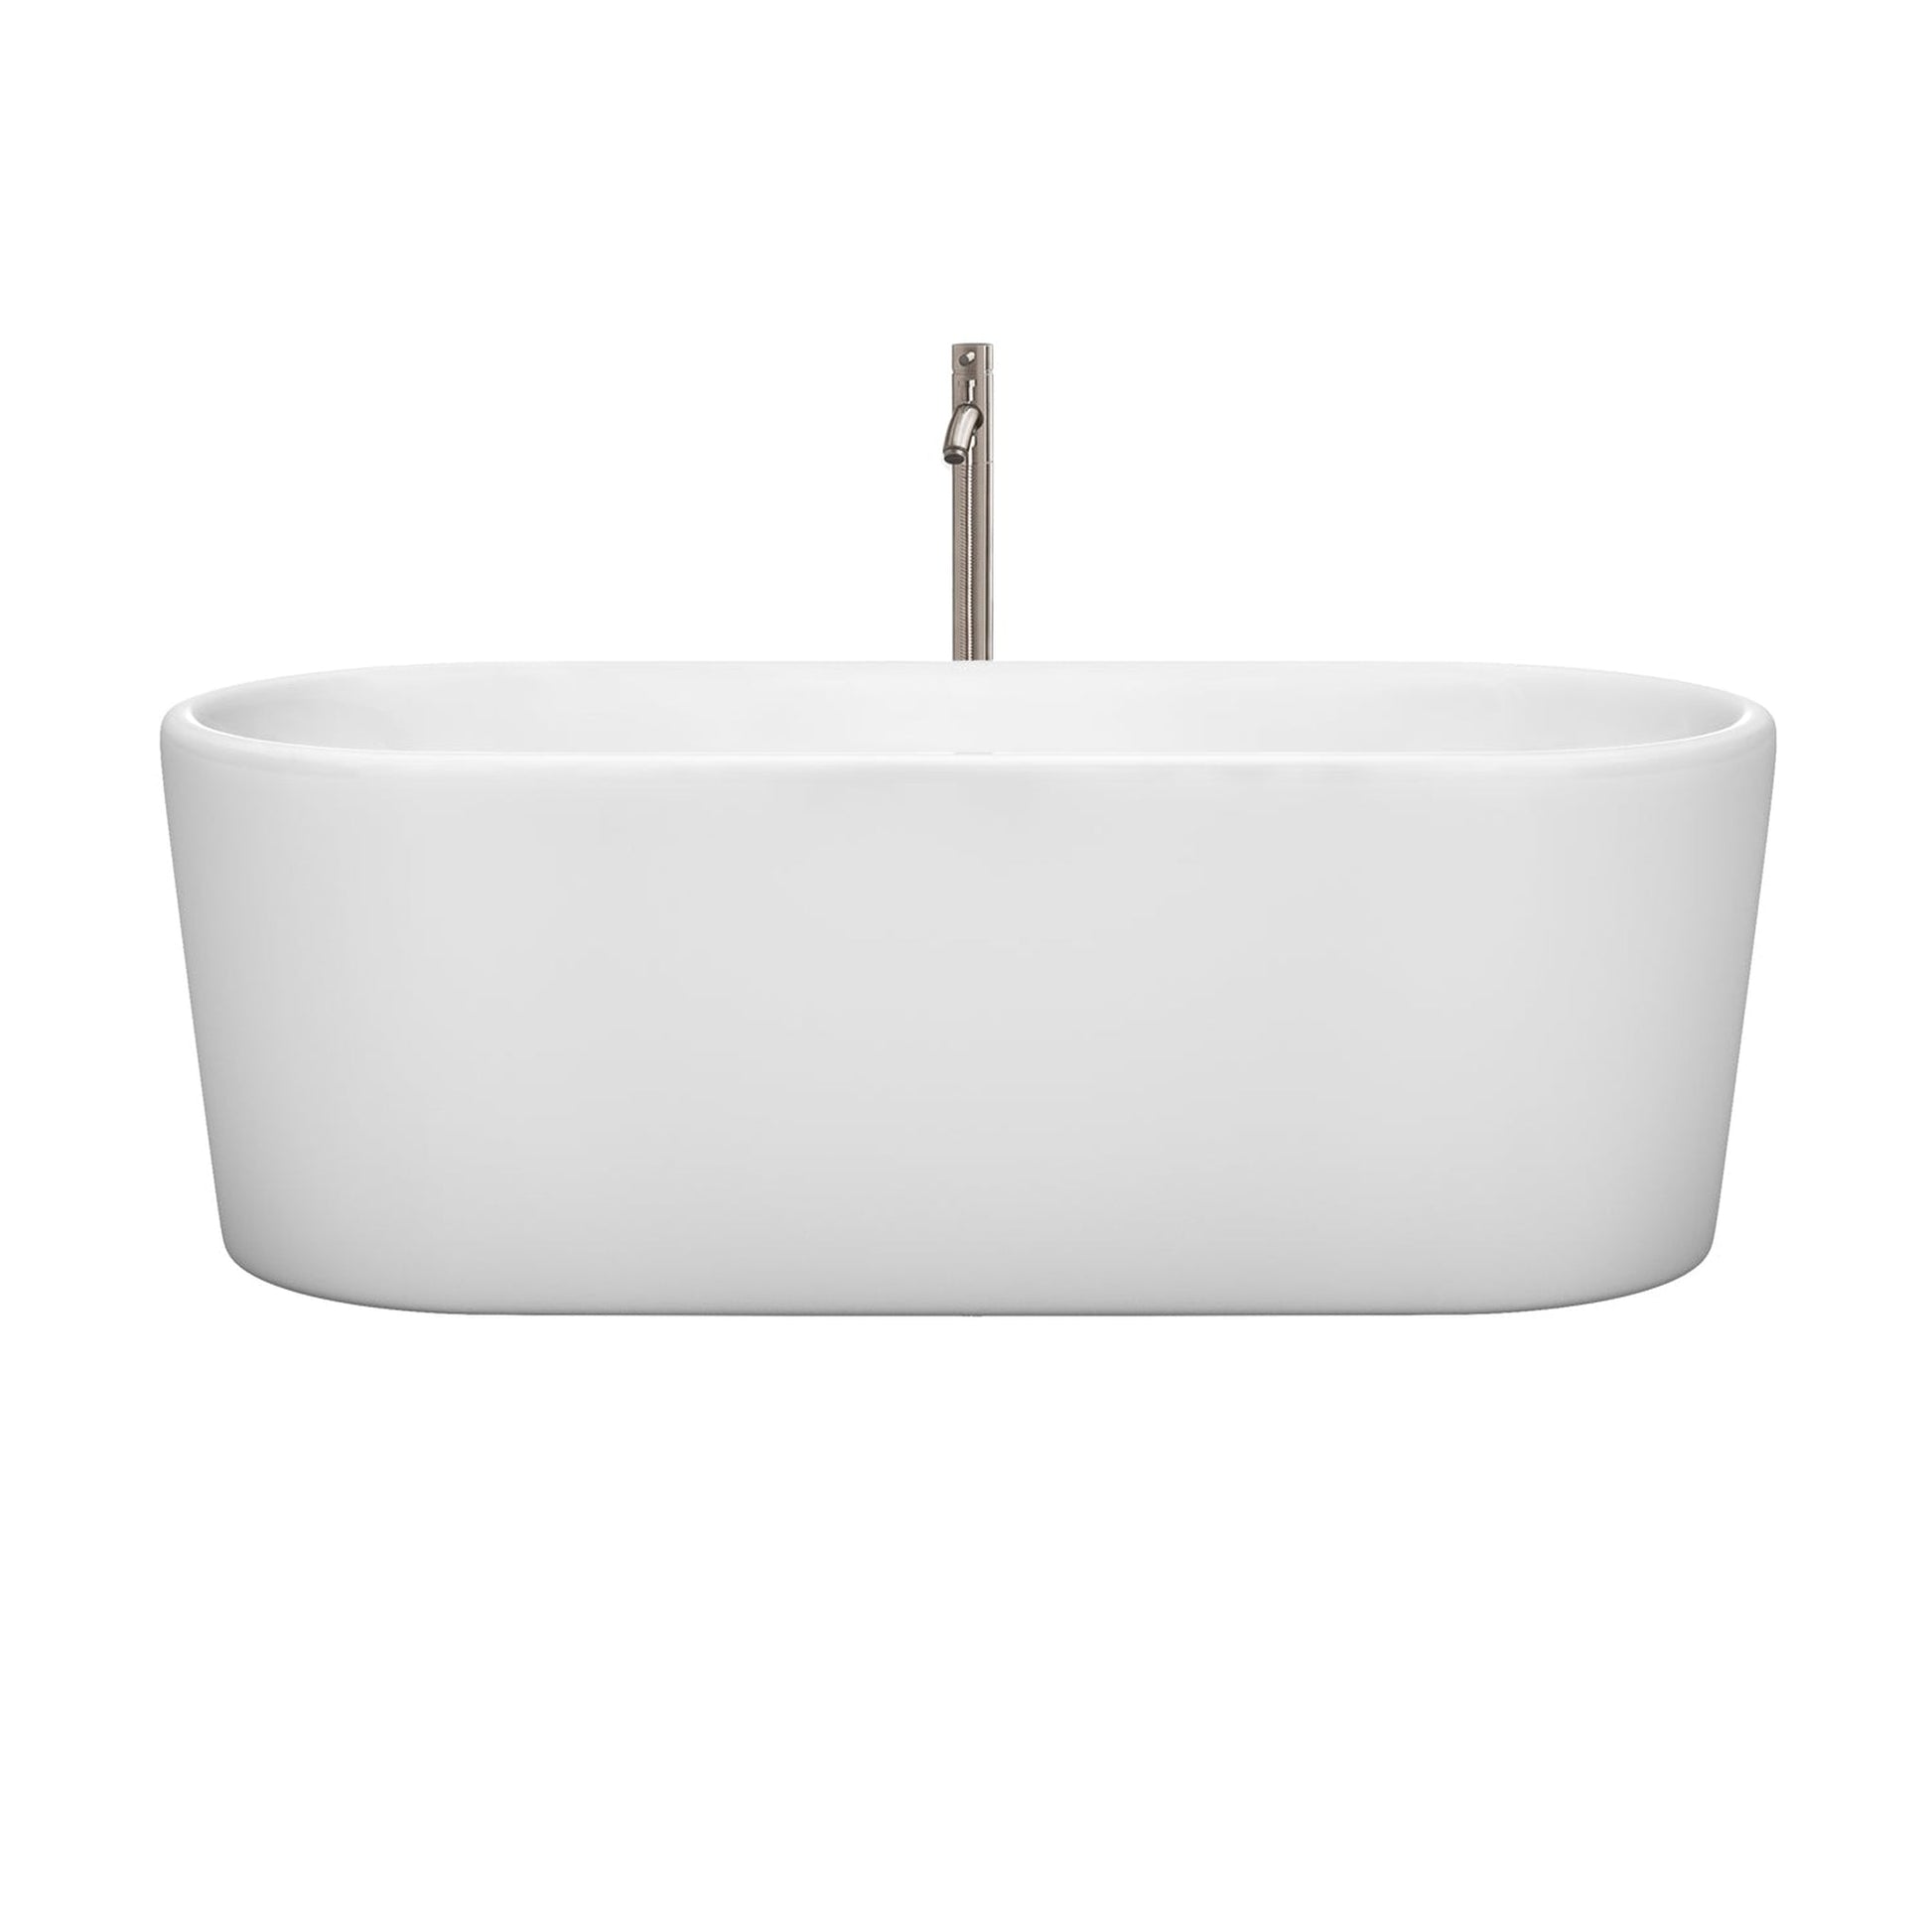 Wyndham Collection Ursula 67" Freestanding Bathtub in White With Floor Mounted Faucet, Drain and Overflow Trim in Brushed Nickel